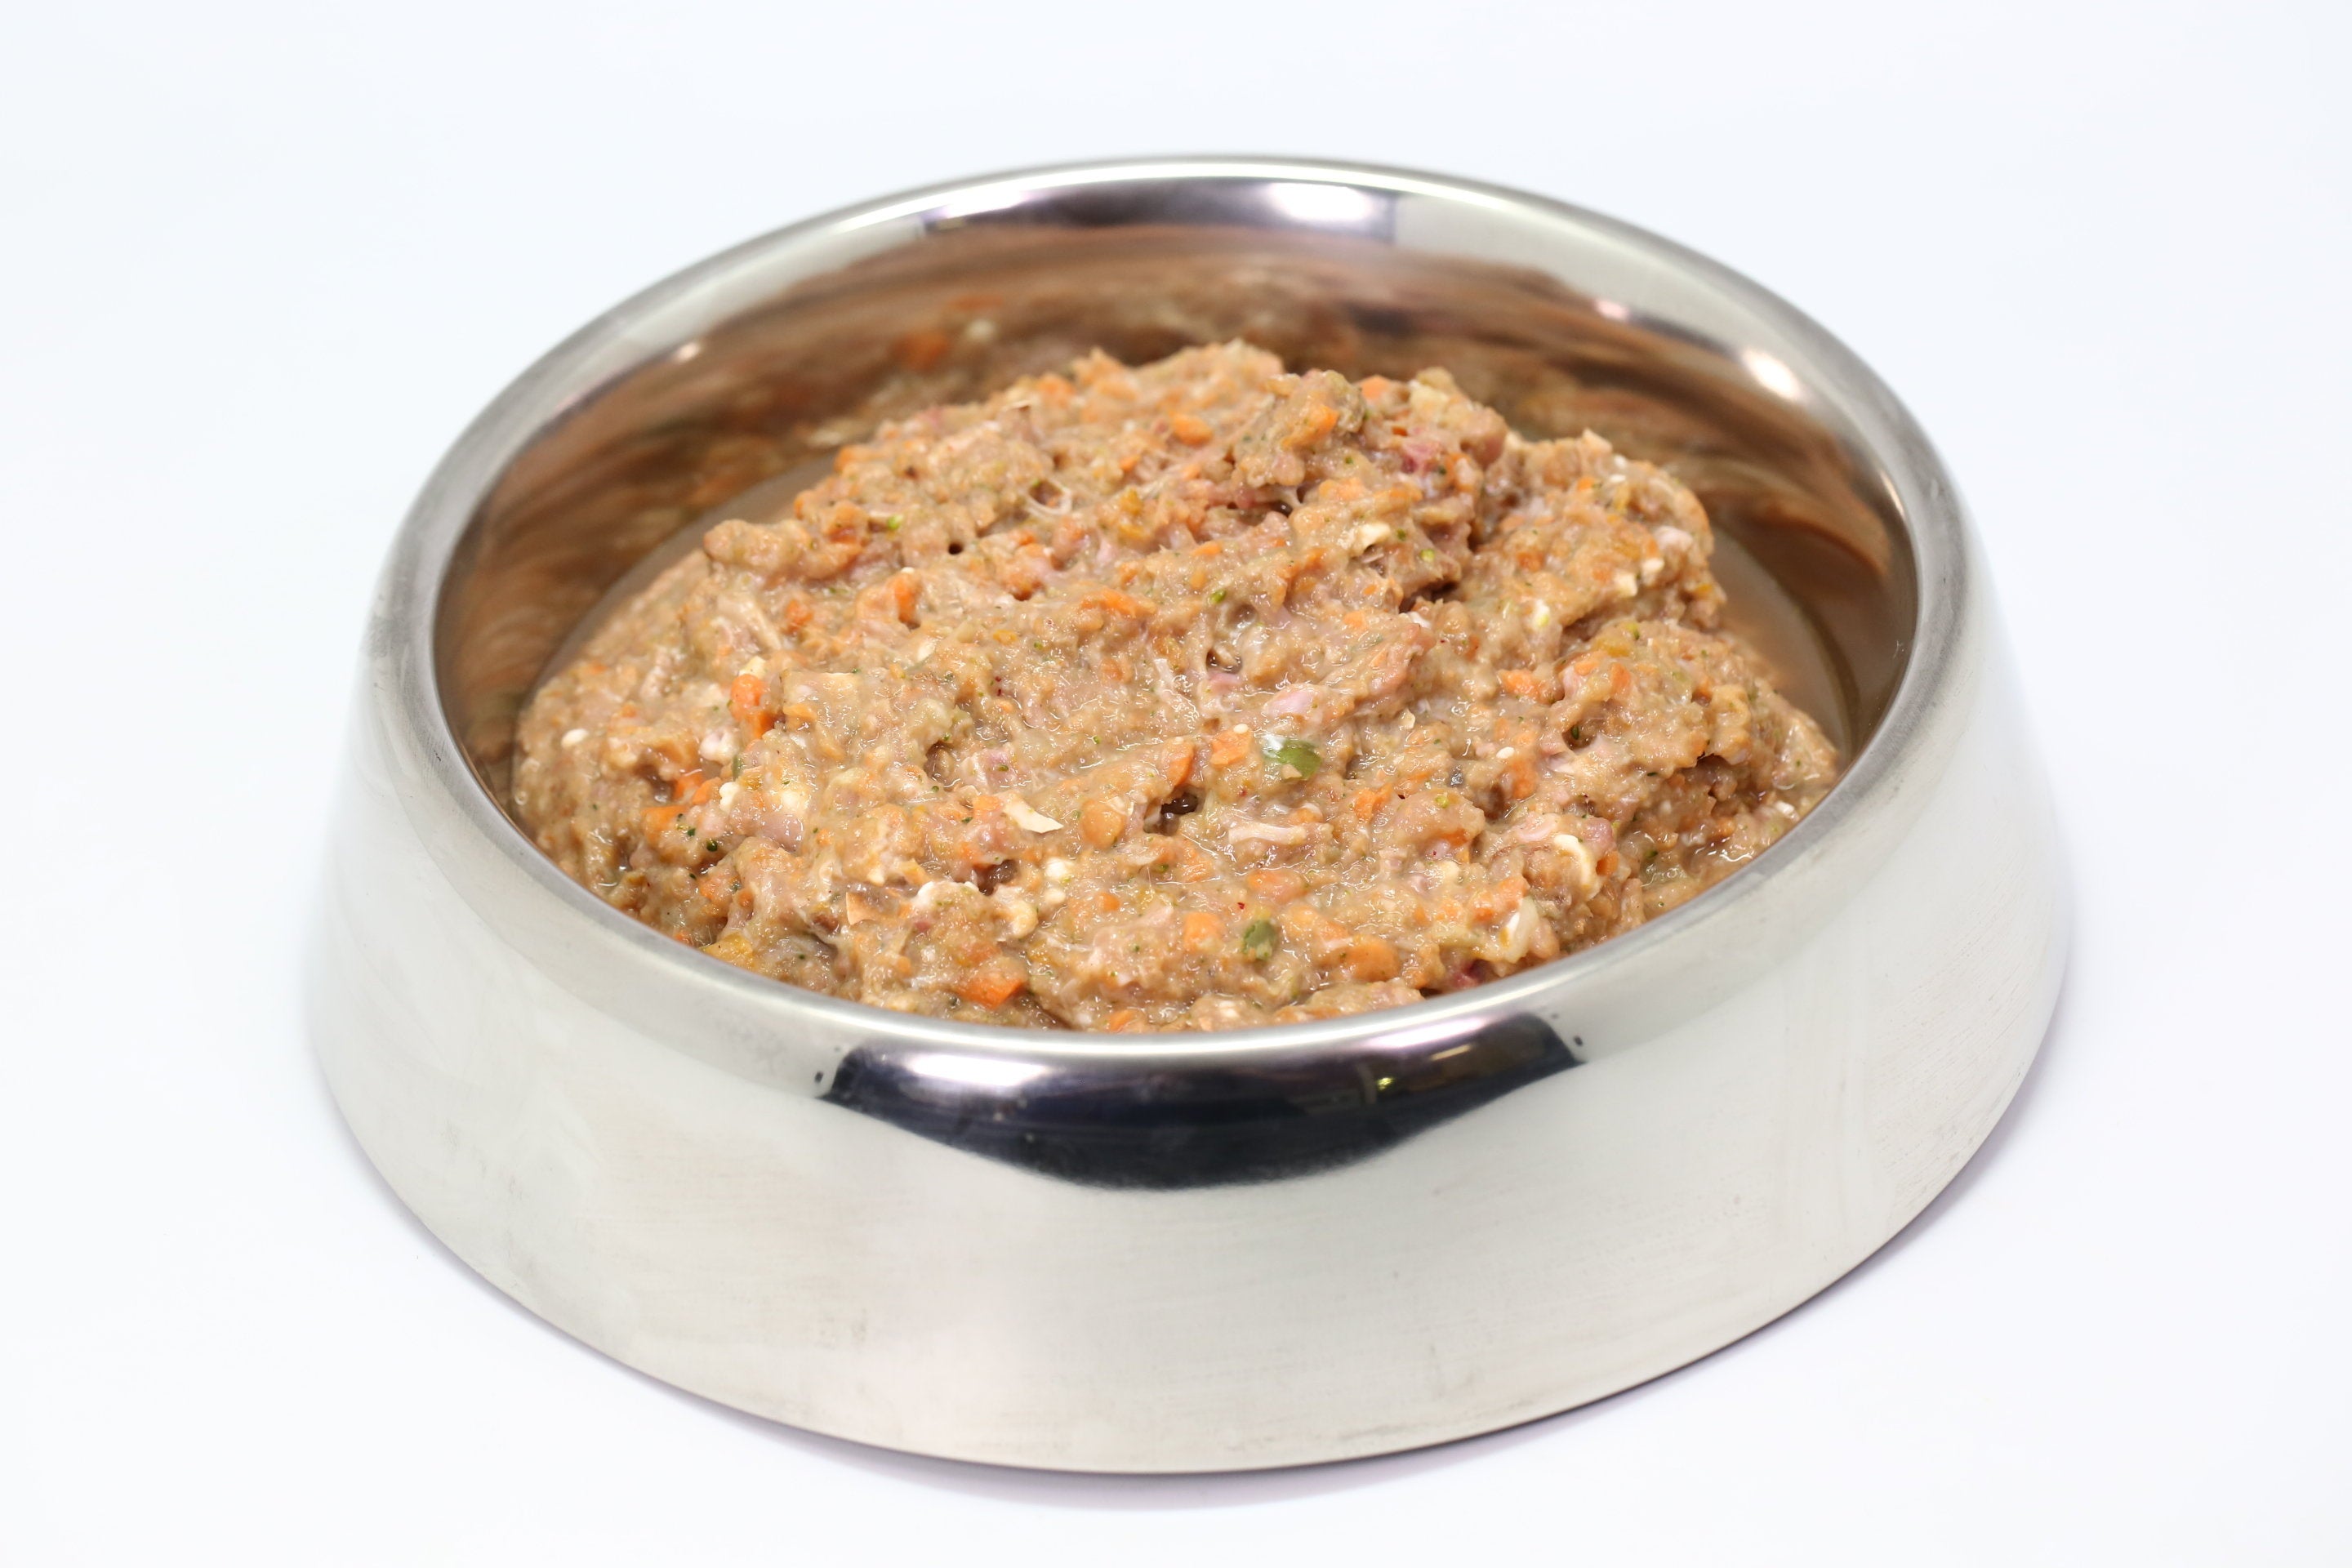 Somerford Raw & Natural - Low Purine Adult Dog Food New England Beef & Veg Pack + FREE Meaty Bones